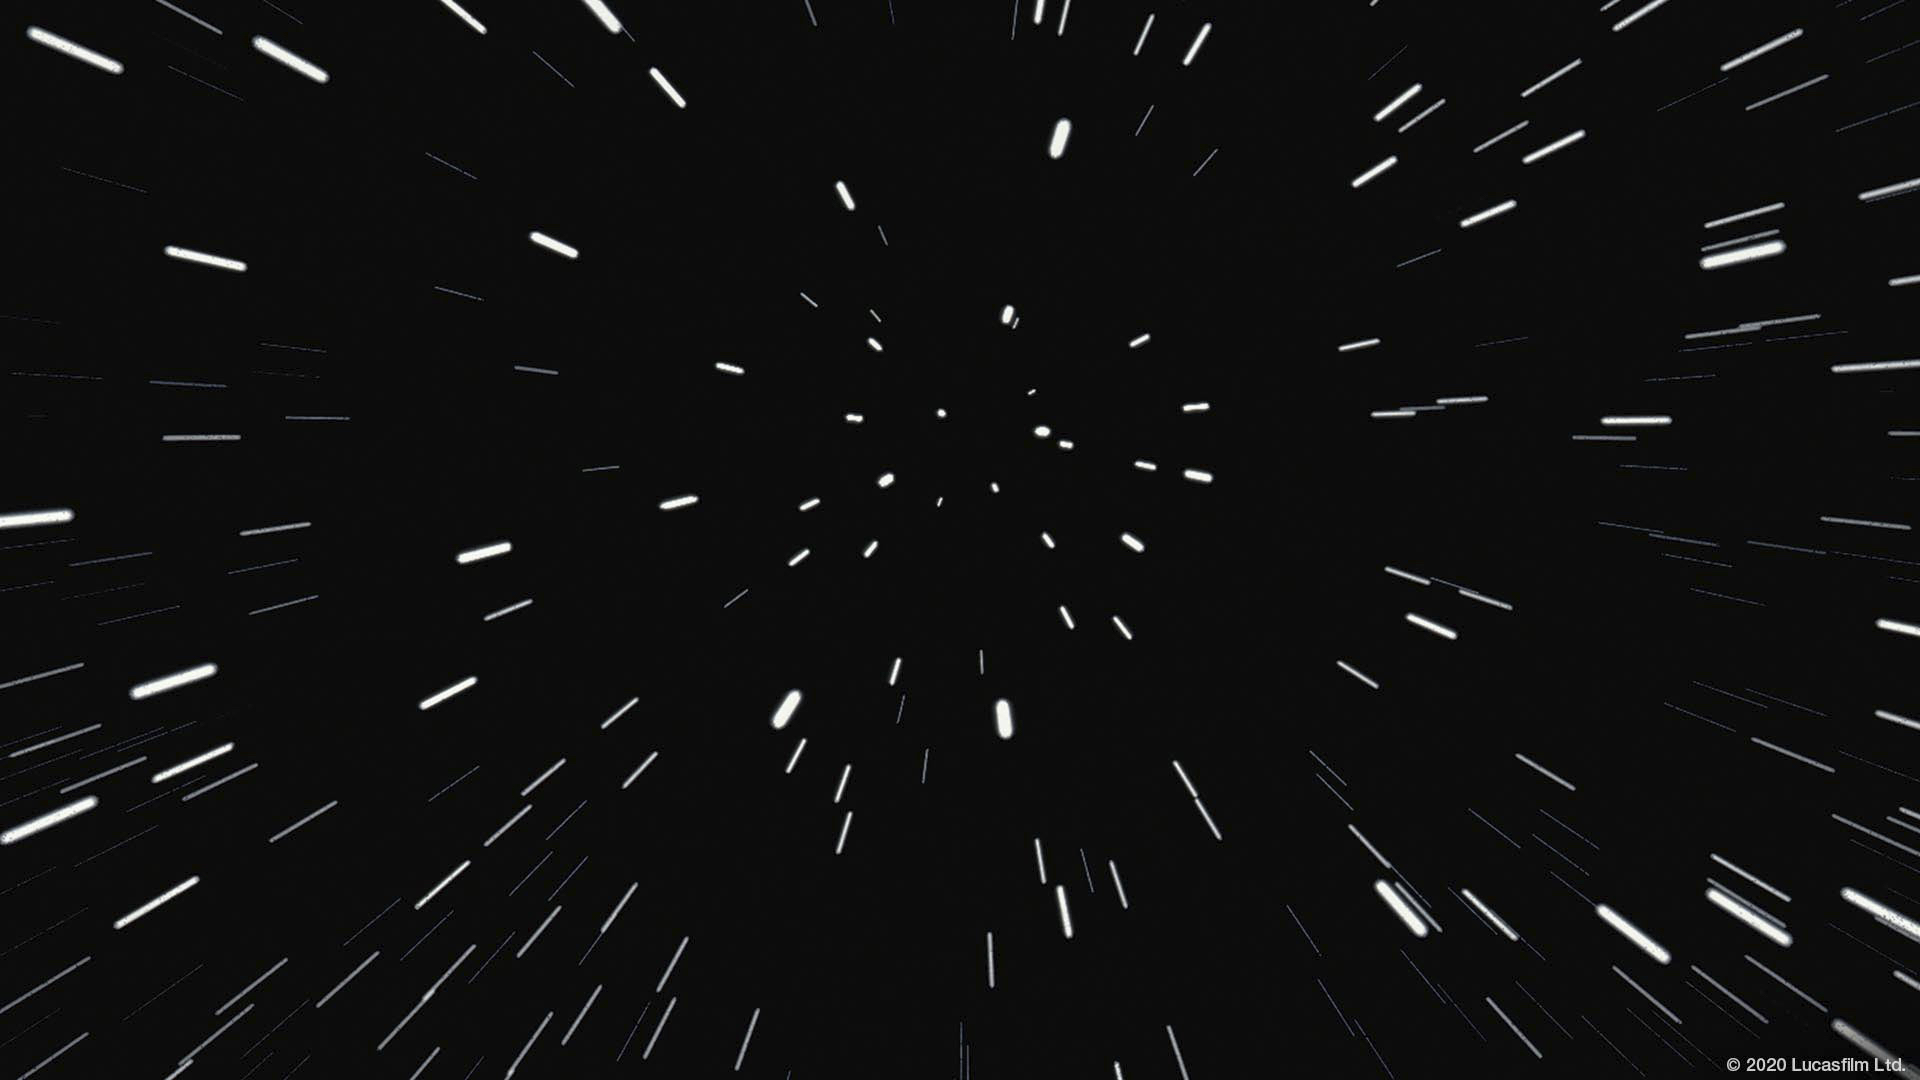 Star Wars, Lightspeed background for your Online Meetings